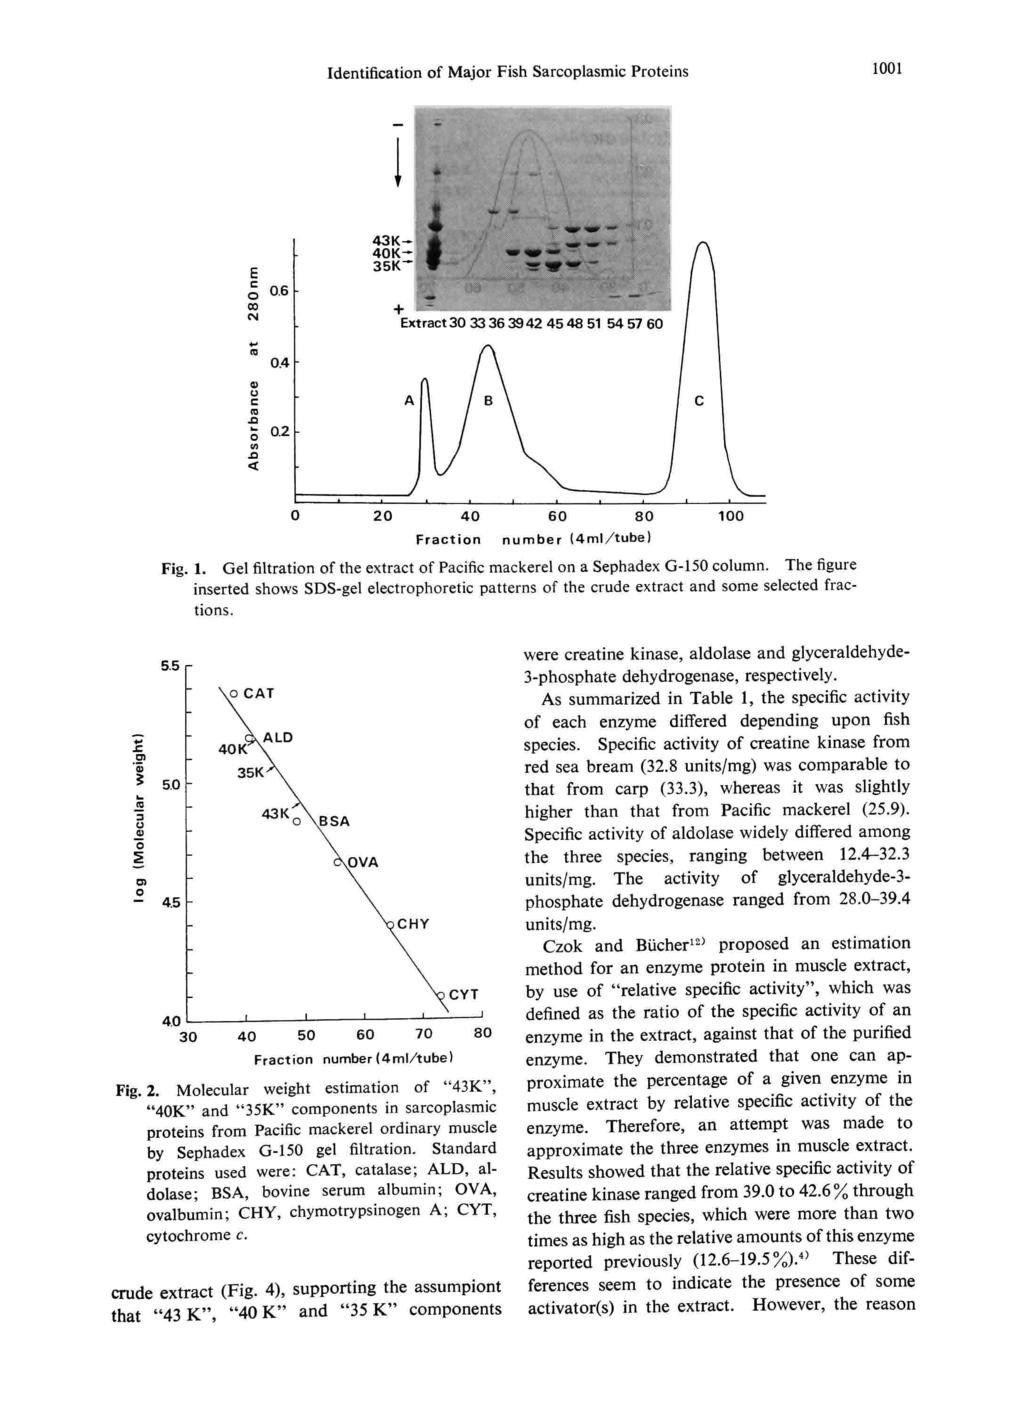 Fig. 1. Gel filtration of the extract of Pacific mackerel on a Sephadex G-150 column. The figure inserted shows SDS-gel electrophoretic patterns of the crude extract and some selected fractions. Fig.